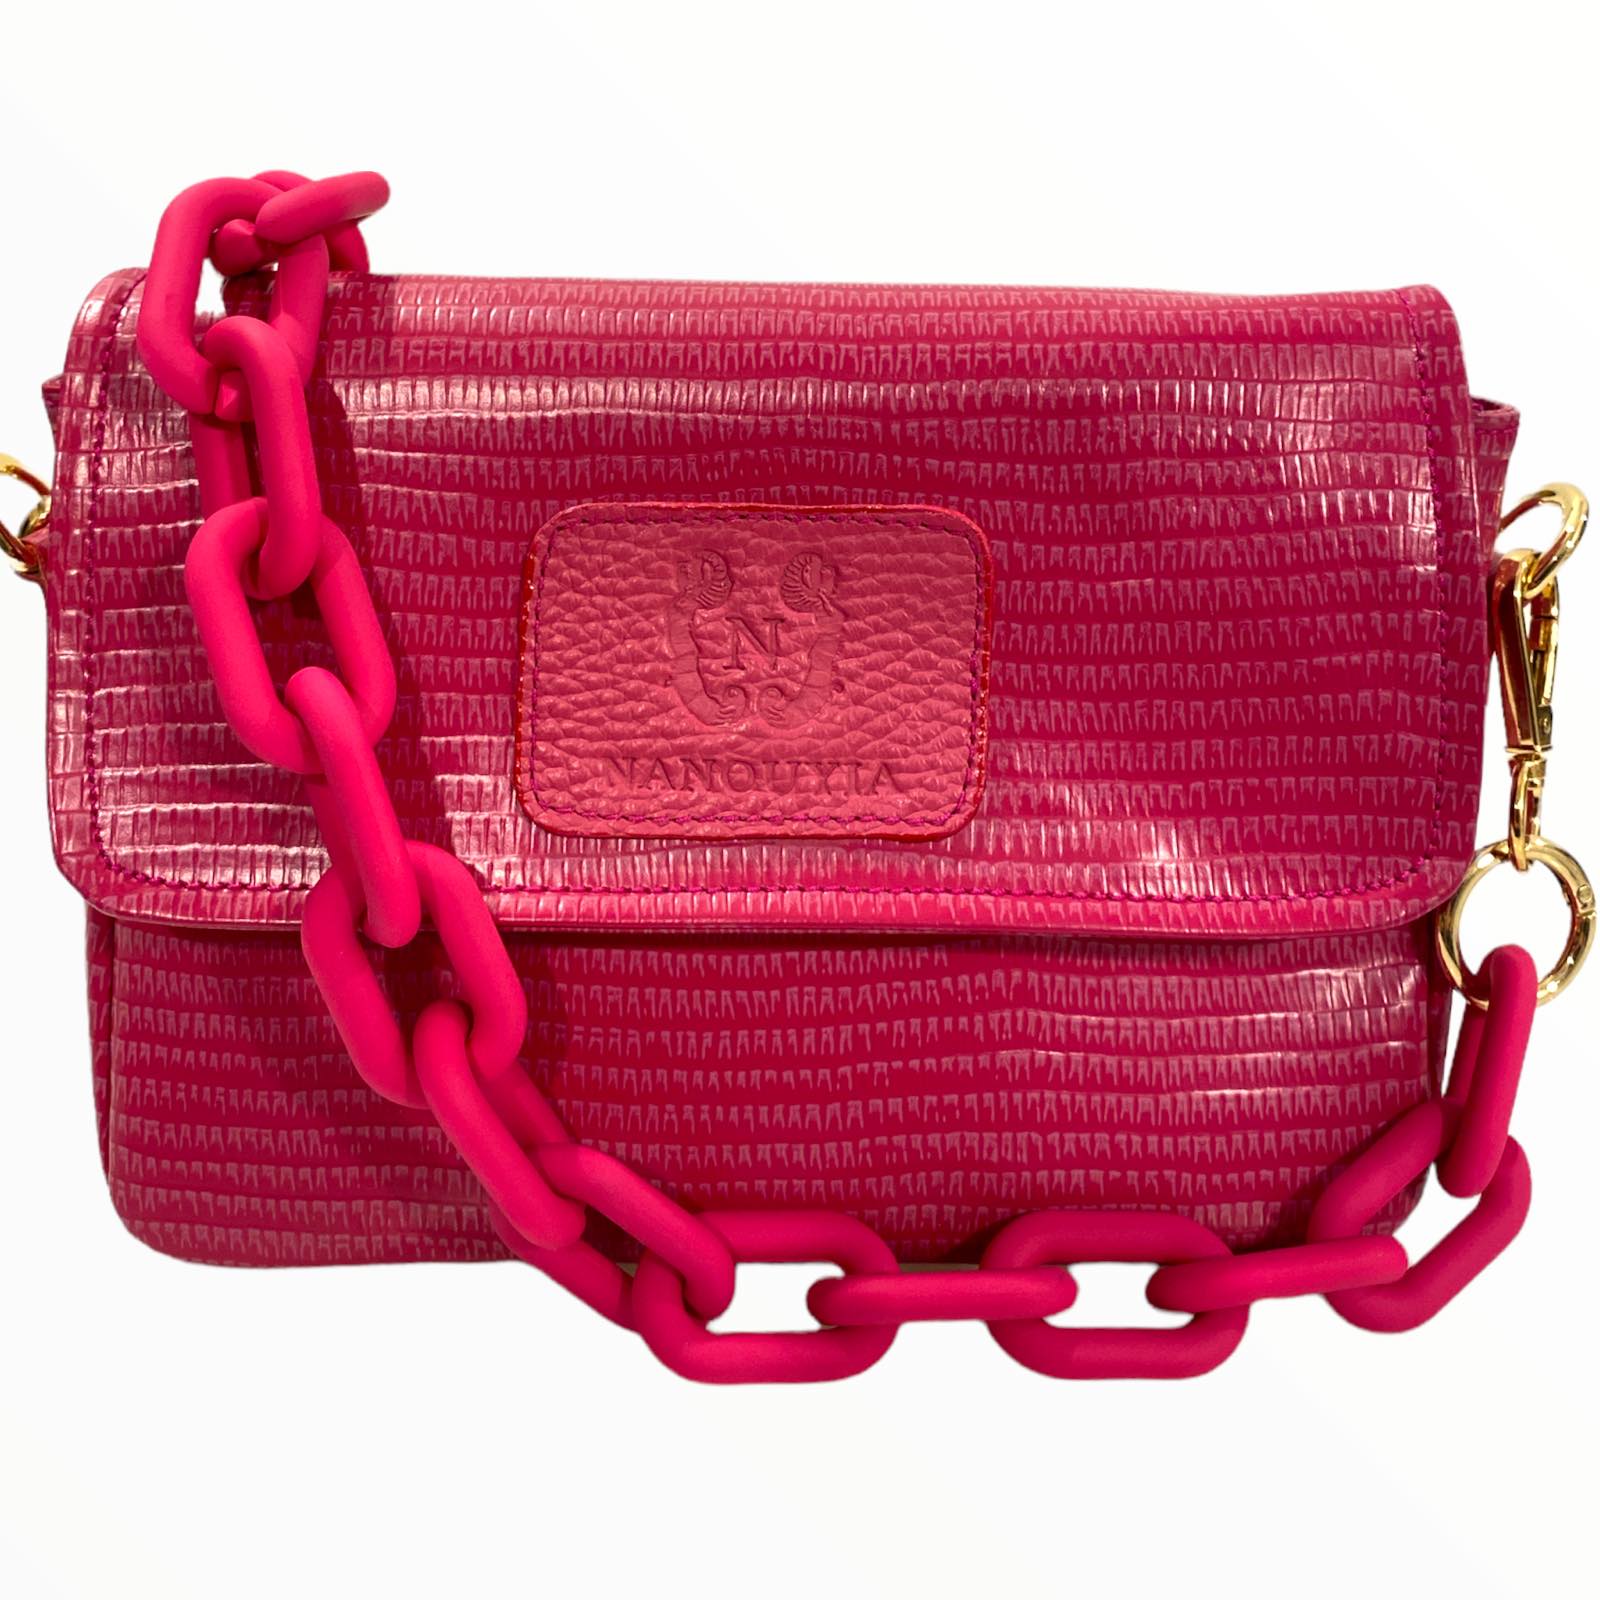 Mandy mini. Strong pink leather limited edition bag